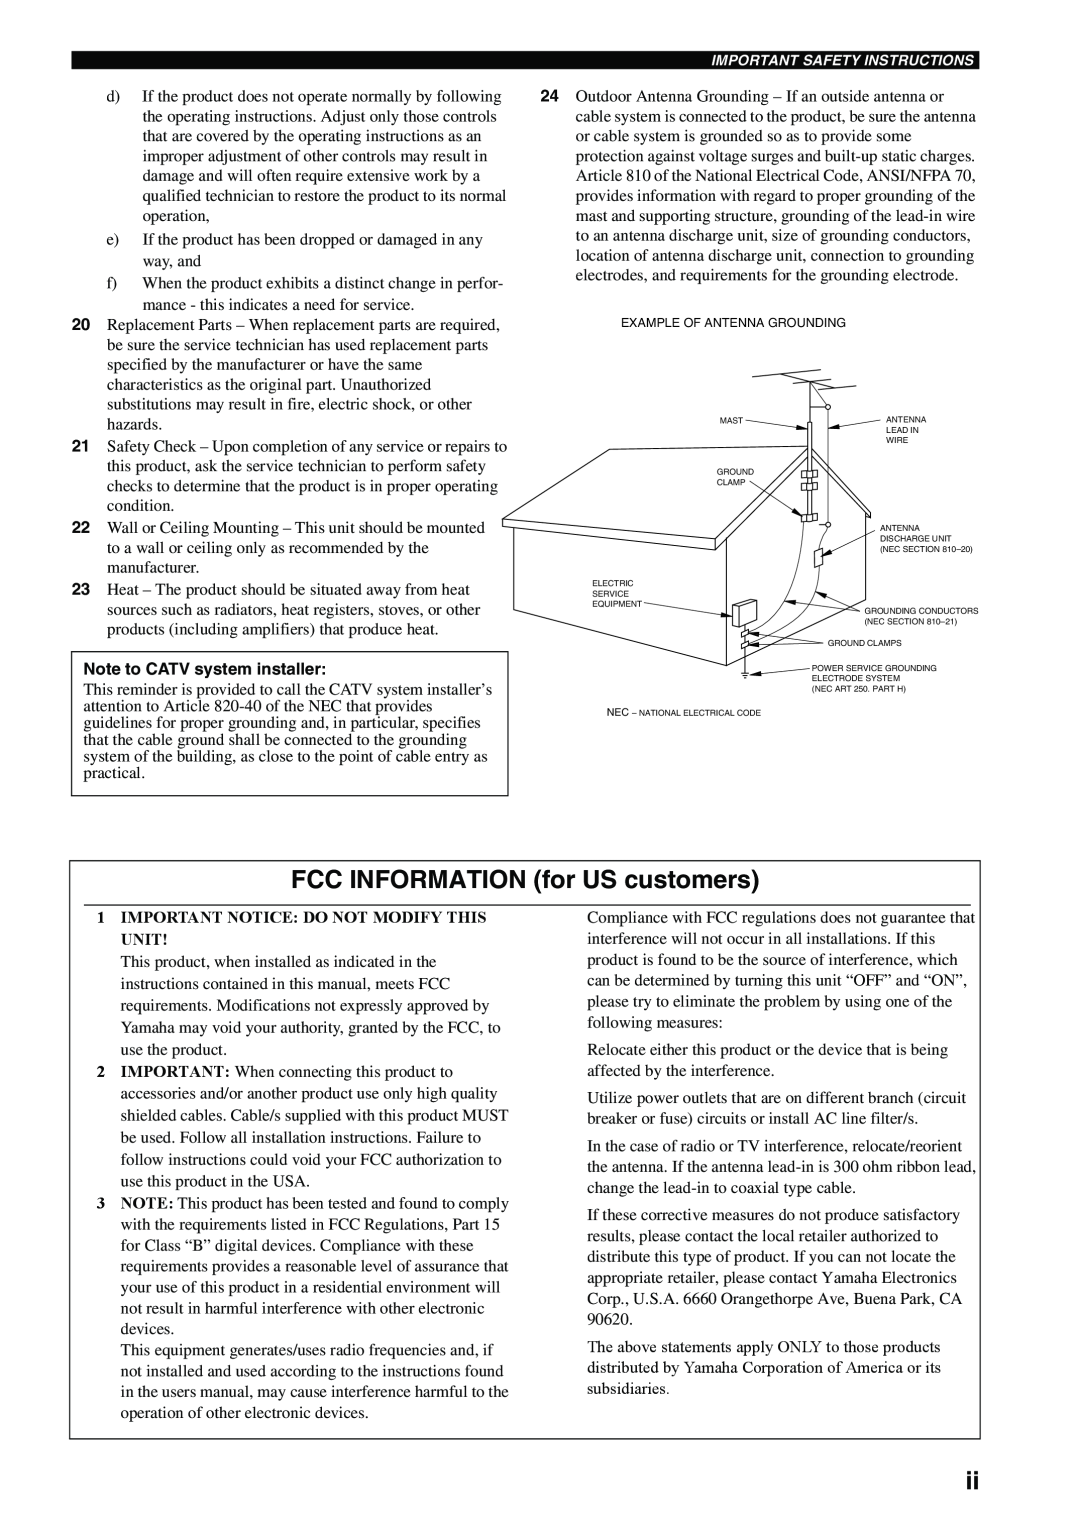 Yamaha HTR-5960 owner manual FCC INFORMATION for US customers, Note to CATV system installer 